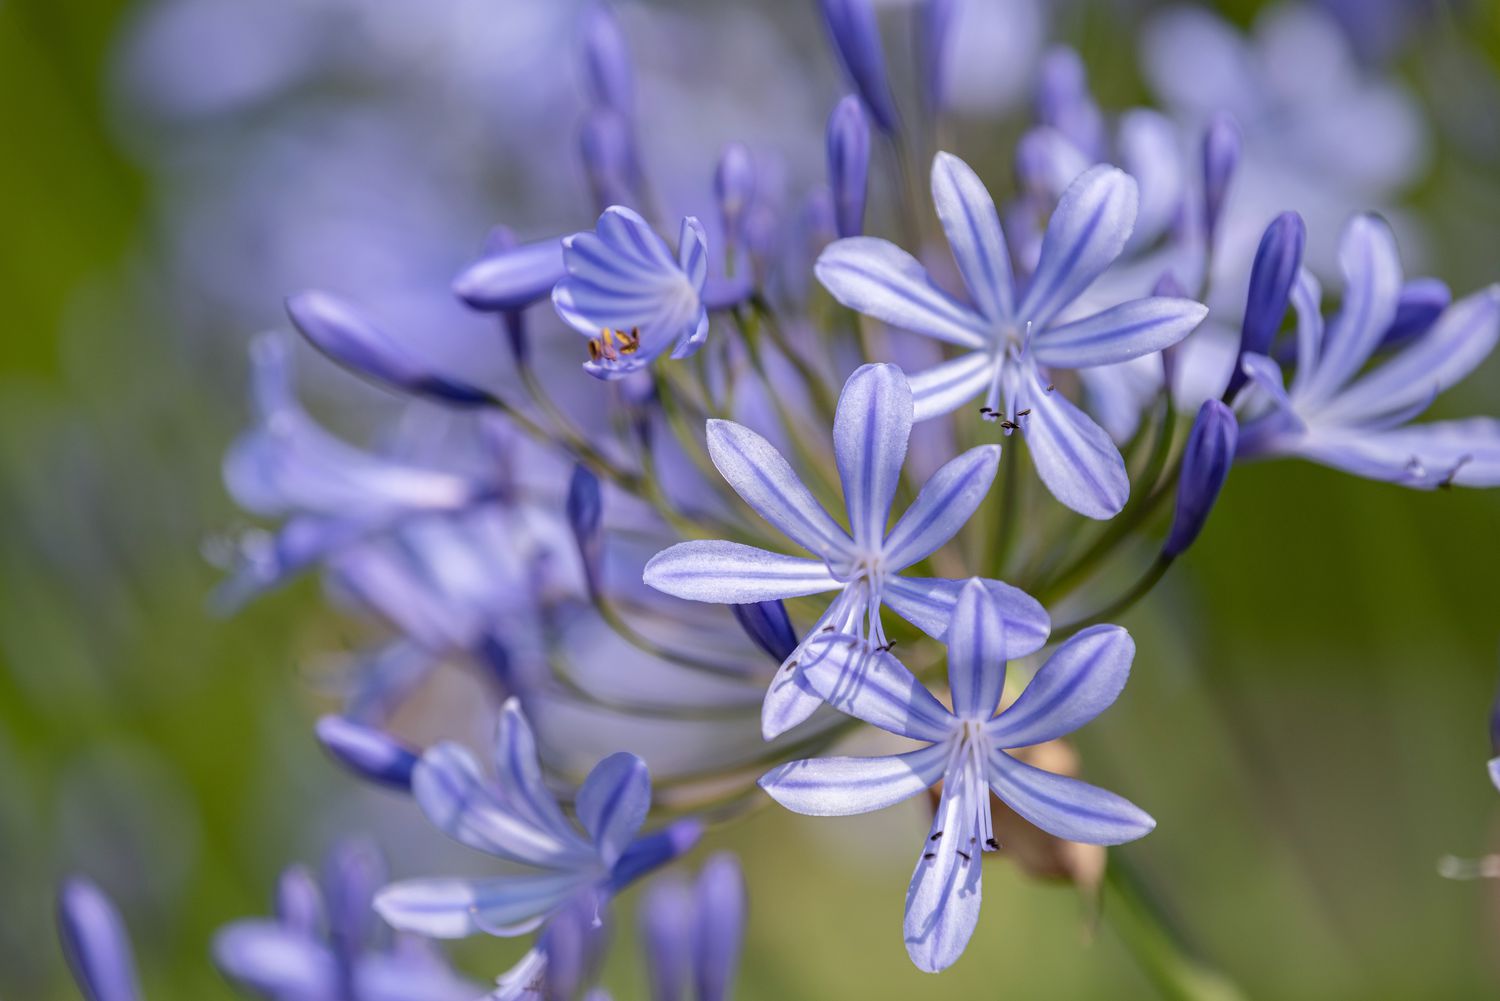 African lily with light purple-striped flowers and buds closeup